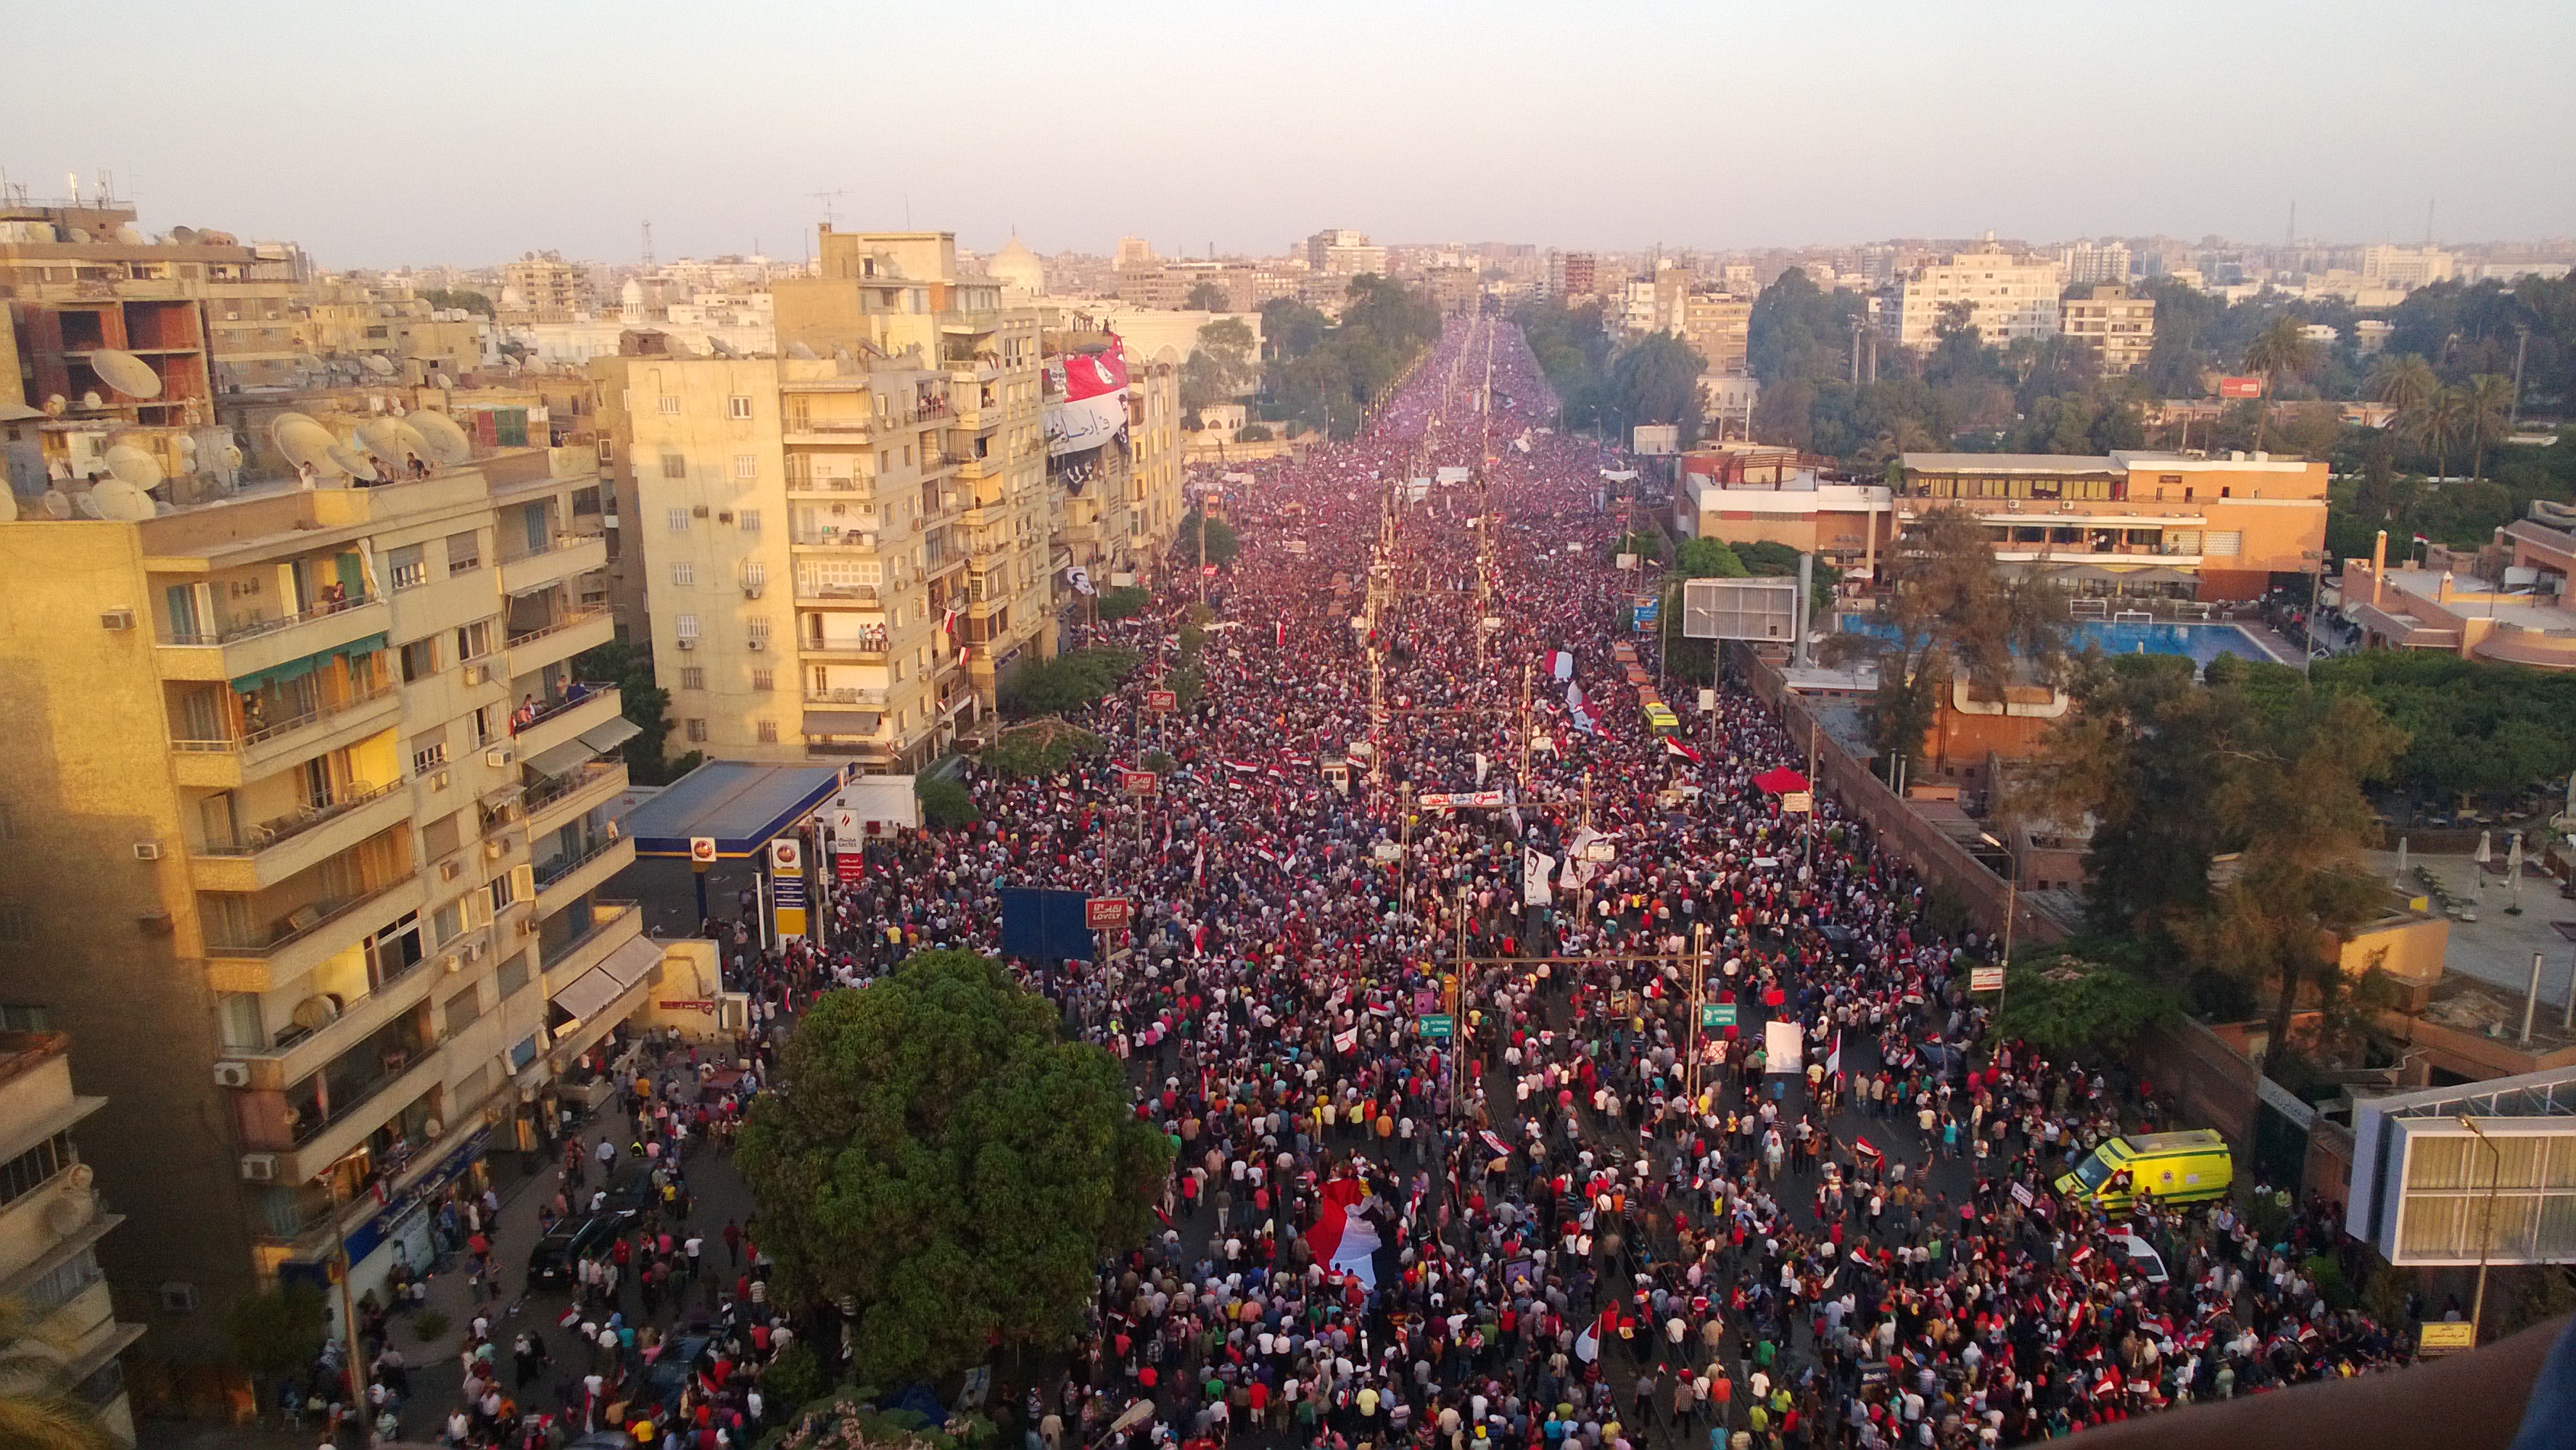 Millions of Egyptians took to the streets against Morsi